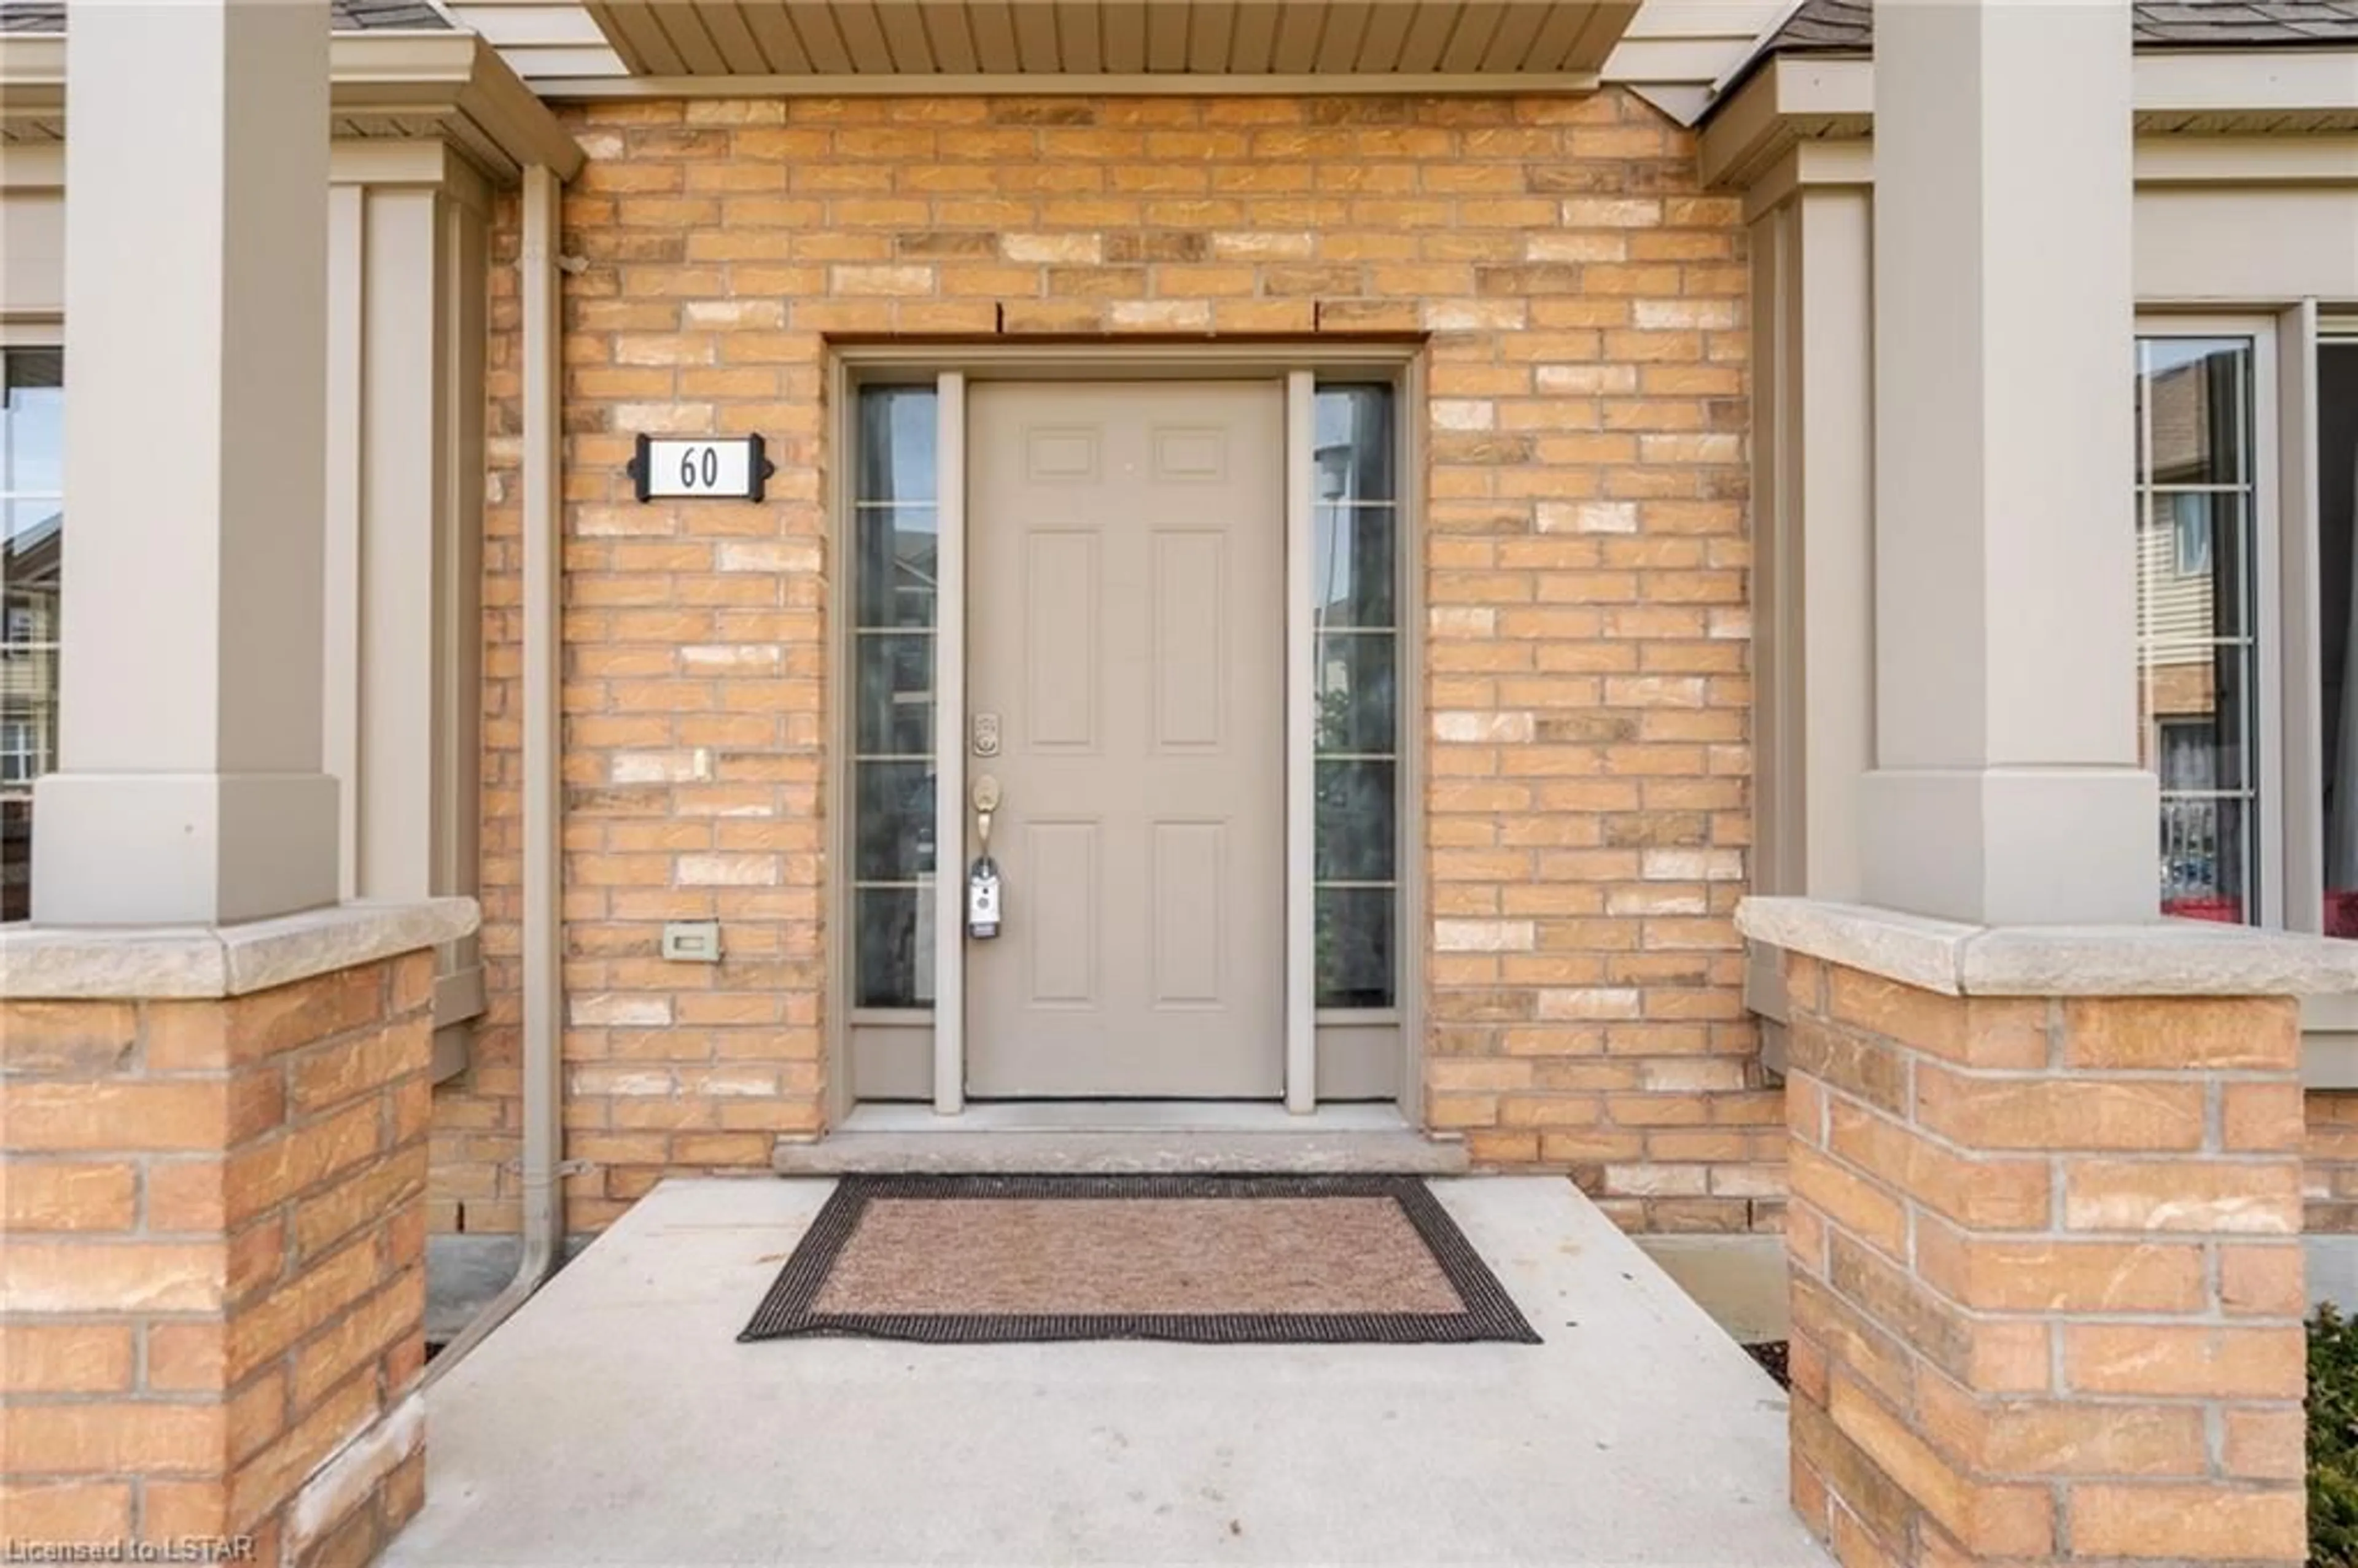 Indoor entryway for 3320 Meadowgate Blvd #60, London Ontario N6M 0A7